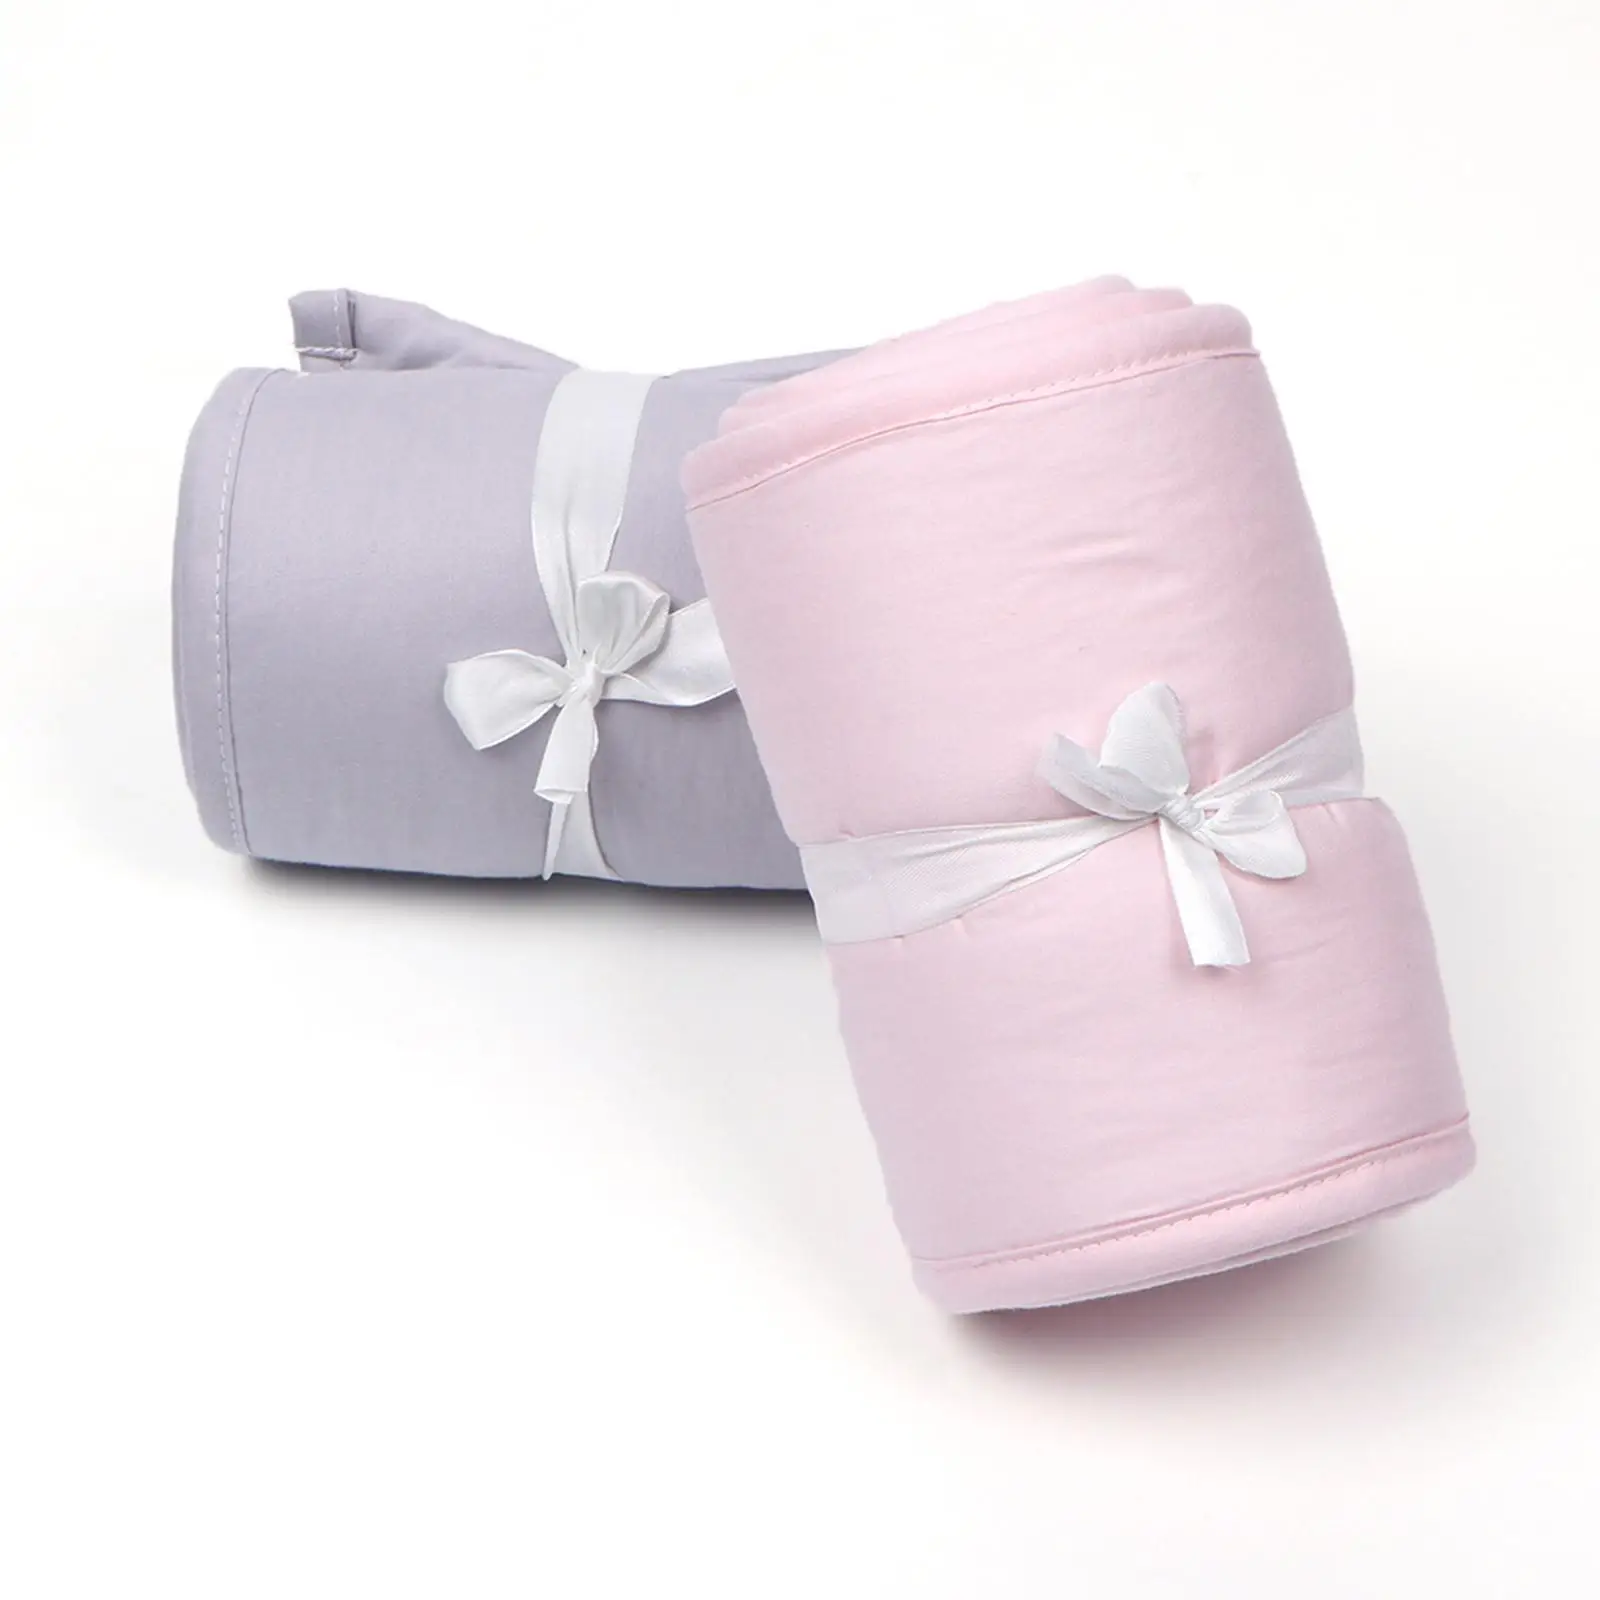 Cotton Cotton Crib Protection Wrap Edge Baby Care Baby Crib Rail Cover for Infants